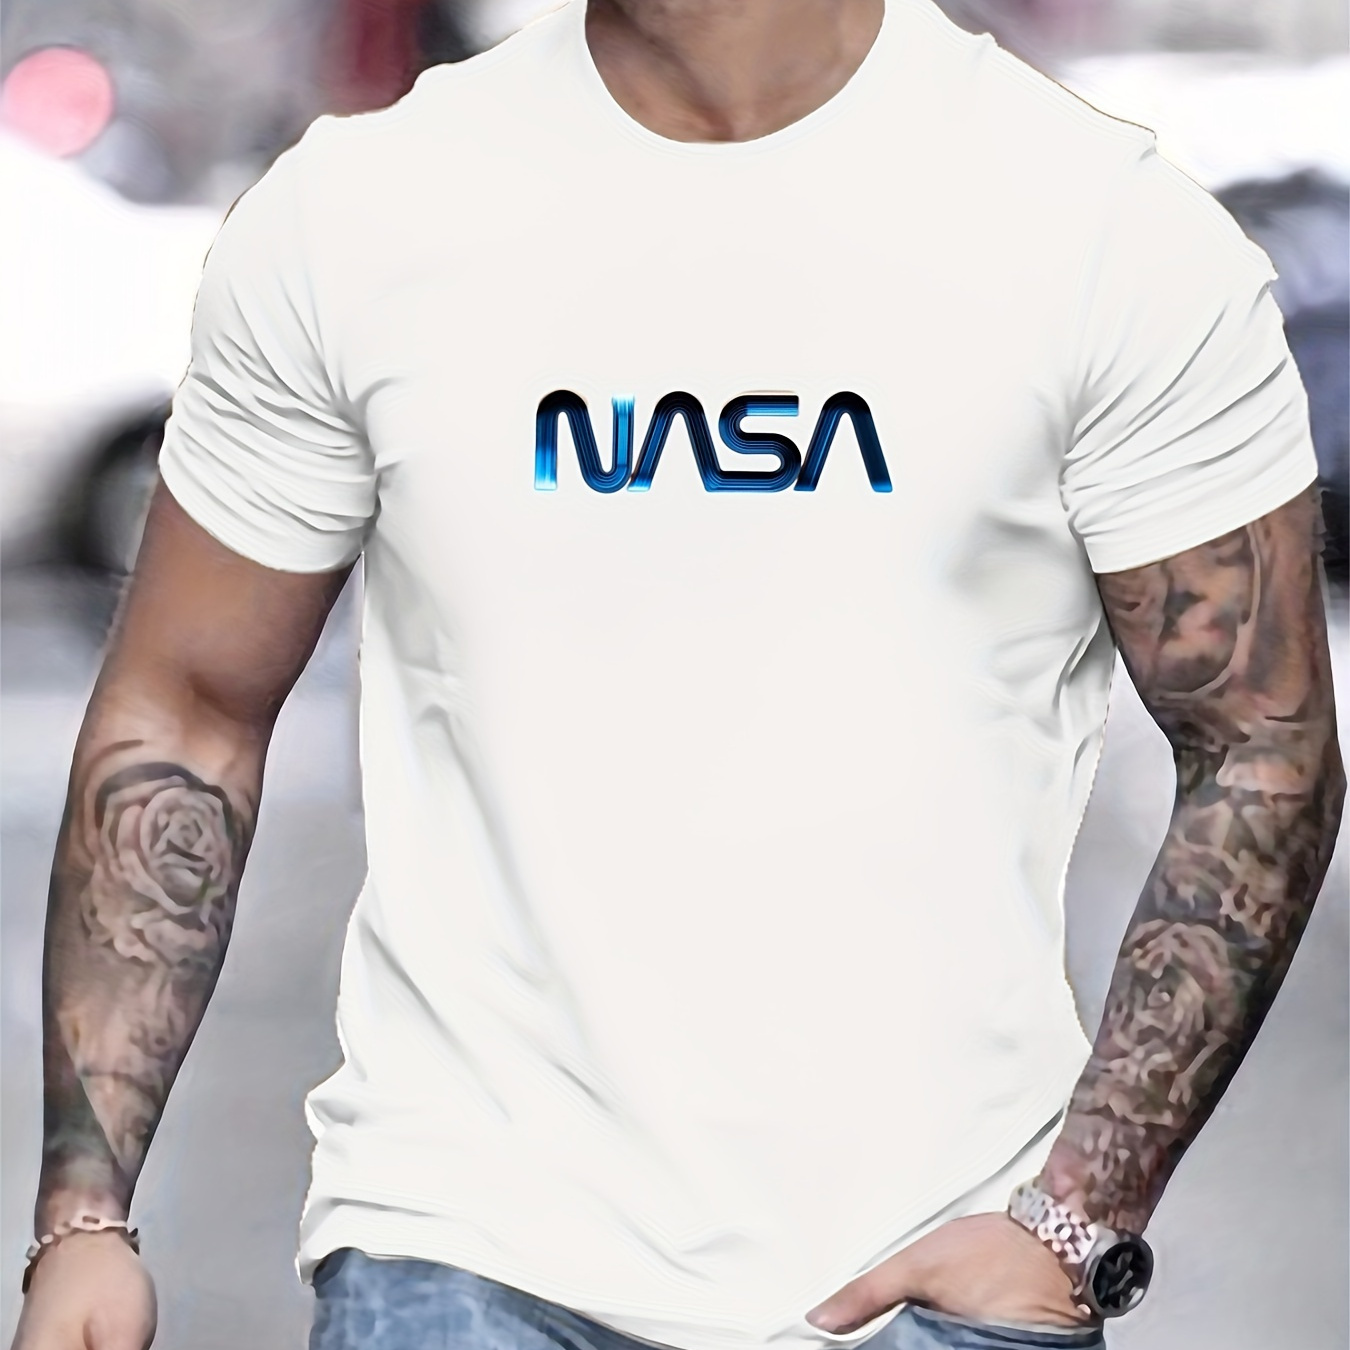 

Unique Nasa, Tees For Men, Casual Short Sleeve T-shirt For Summer